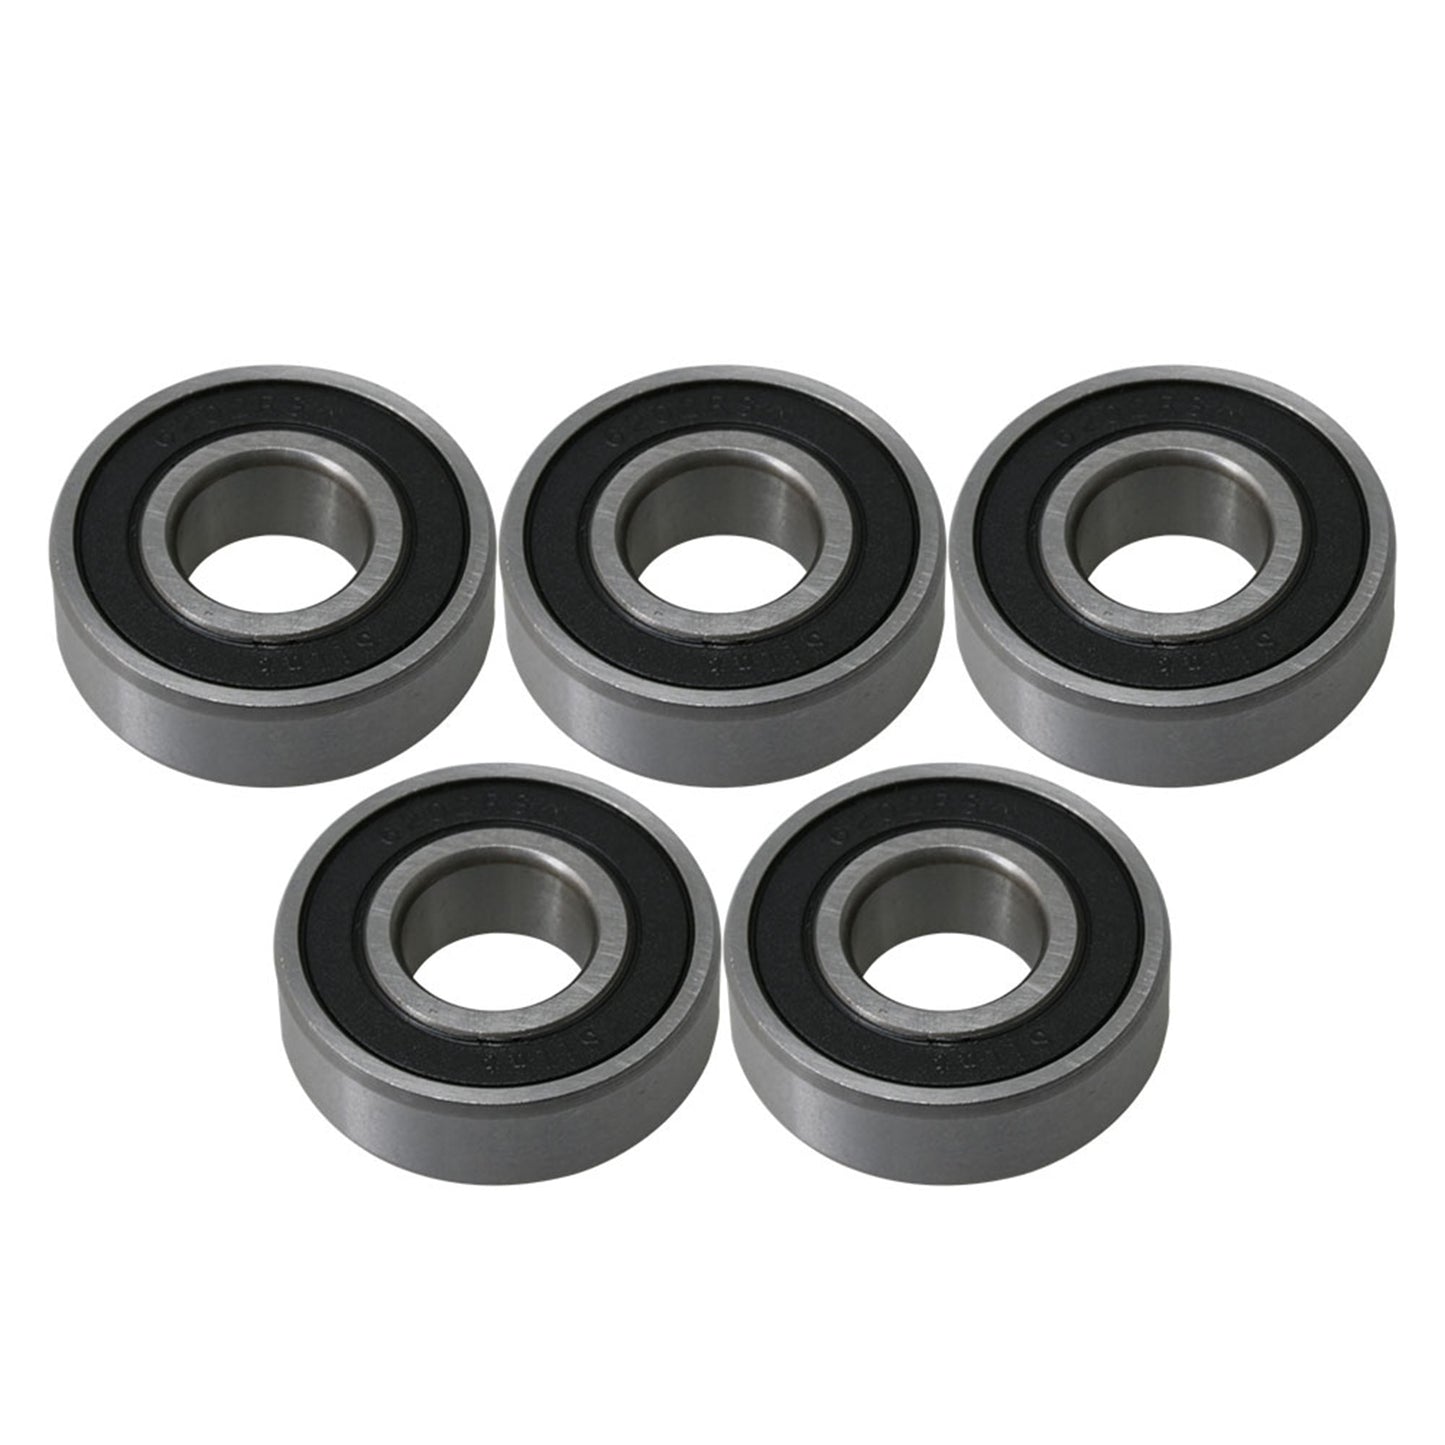 BQLZR 6202RS Single Row Metal Deep Groove Ball Bearing Plastic Cover 15mm Inner Dia 35mm Outer Dia 11mm Width Pack of 5